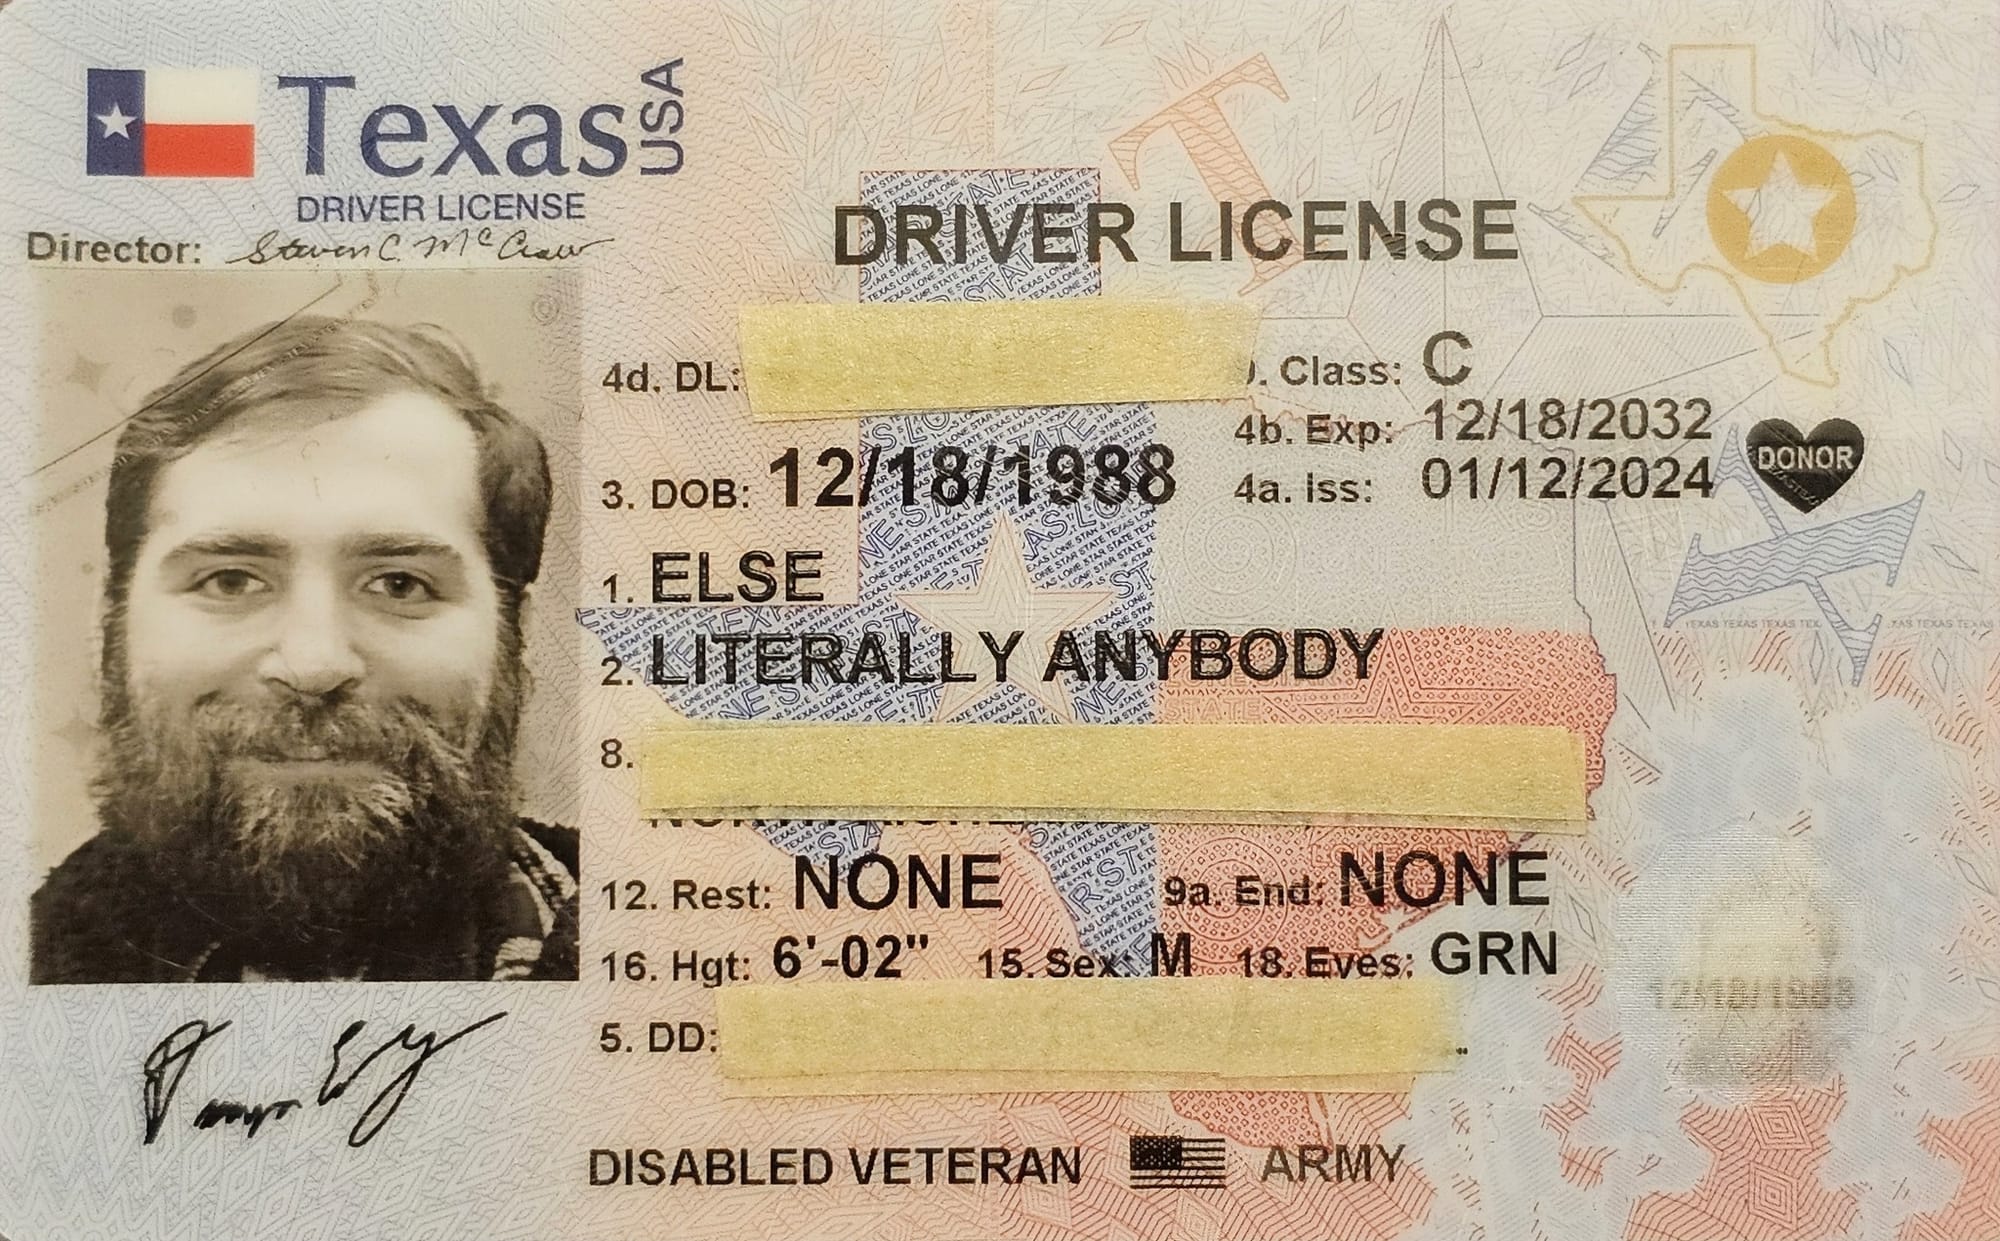 Literally Anybody Else's drivers license showing his new legal name.